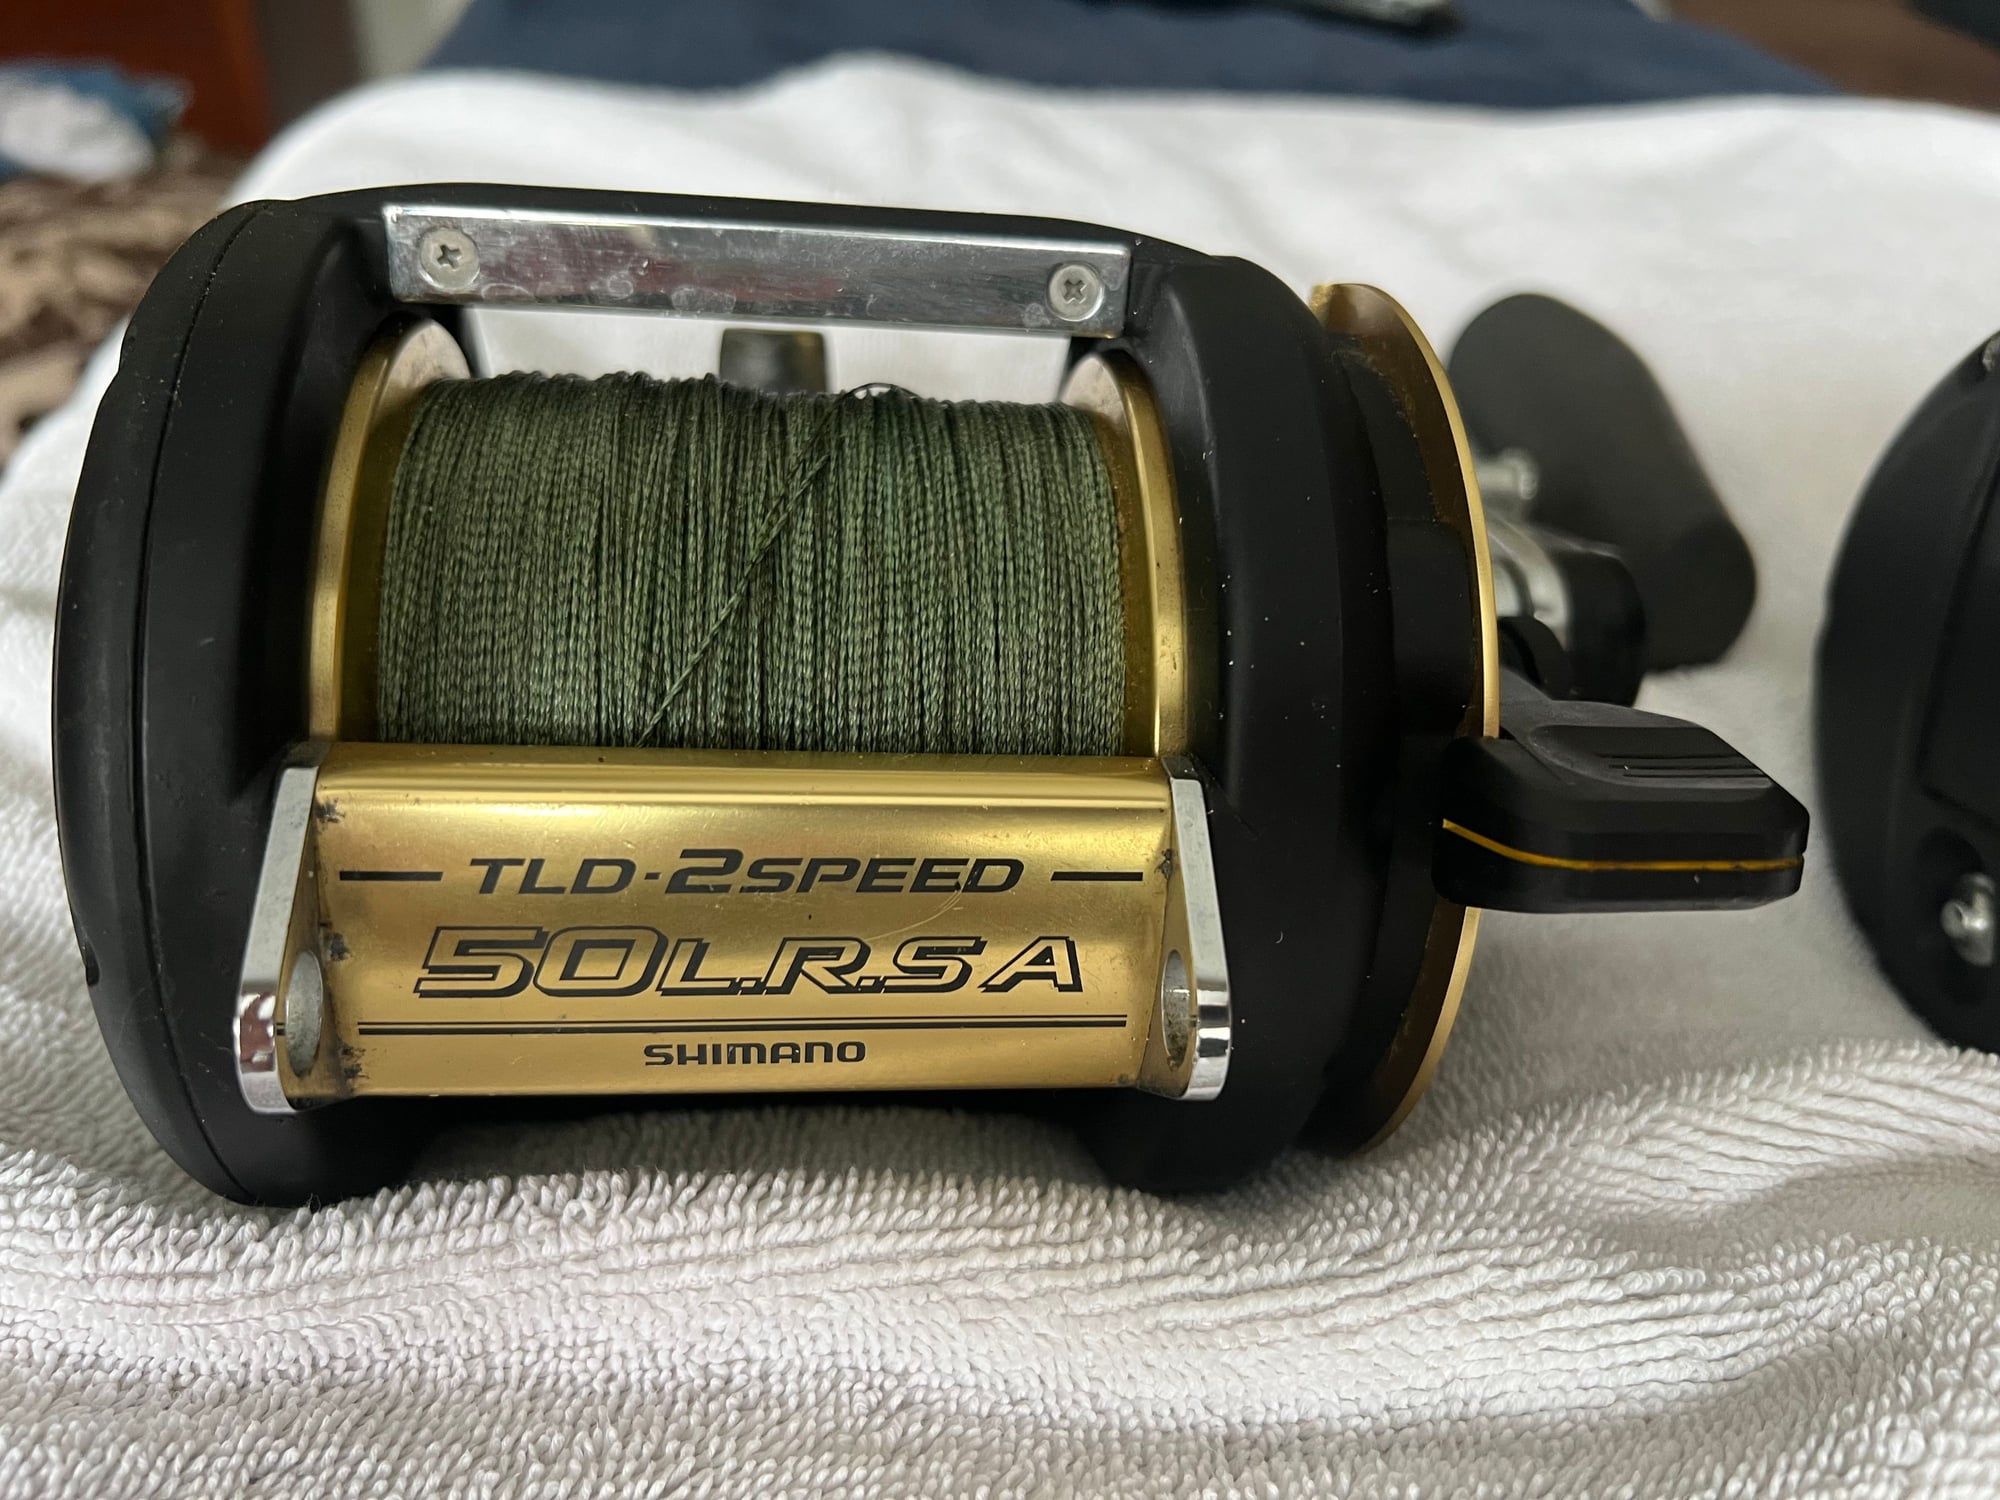 Pair of TLD 50LRSAs with matching reel covers - The Hull Truth - Boating  and Fishing Forum